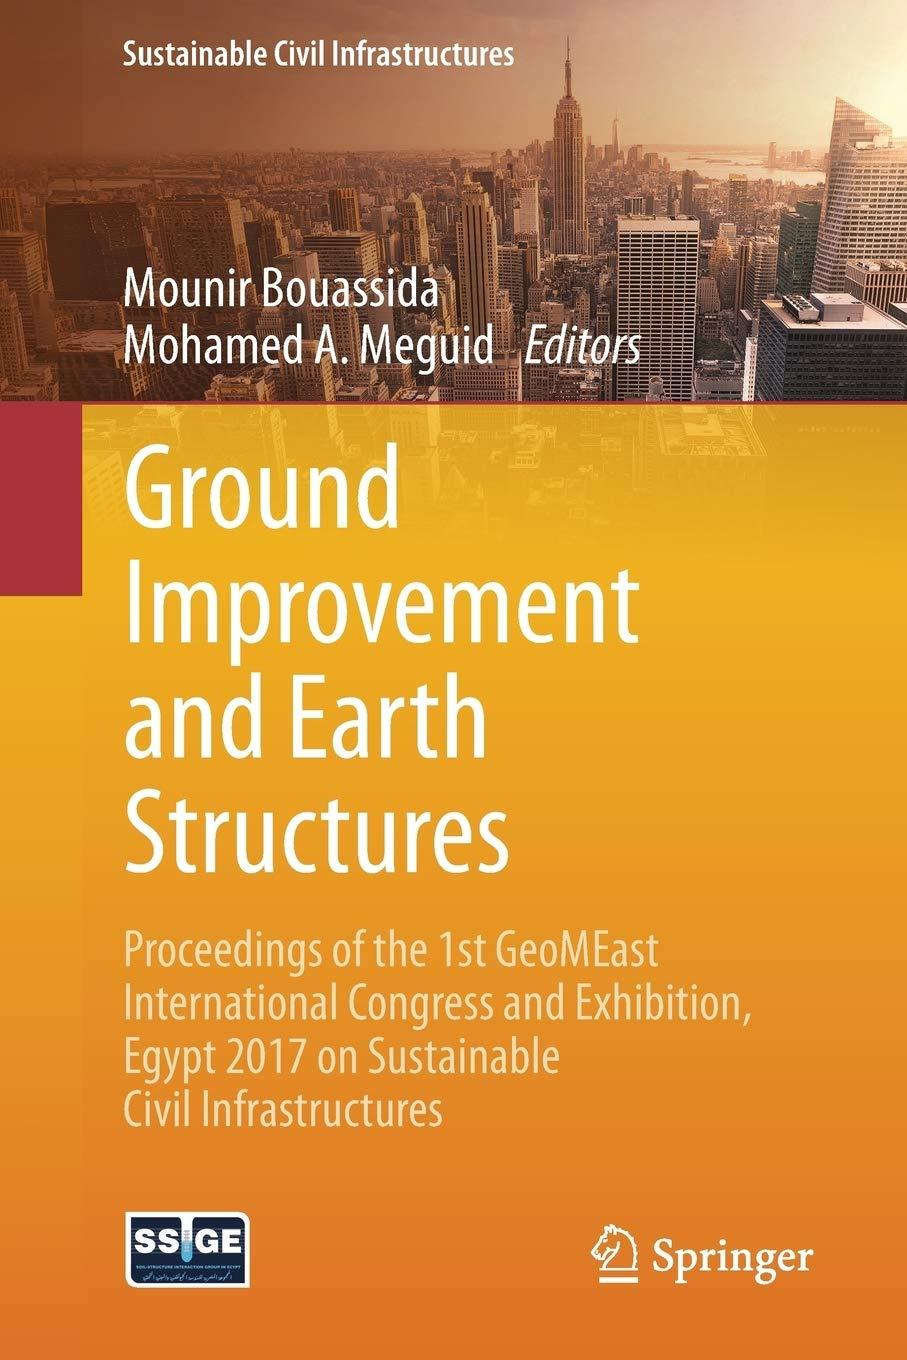 ground improvement and earth structures proceedings of the 1st geomeast international congress and exhibition